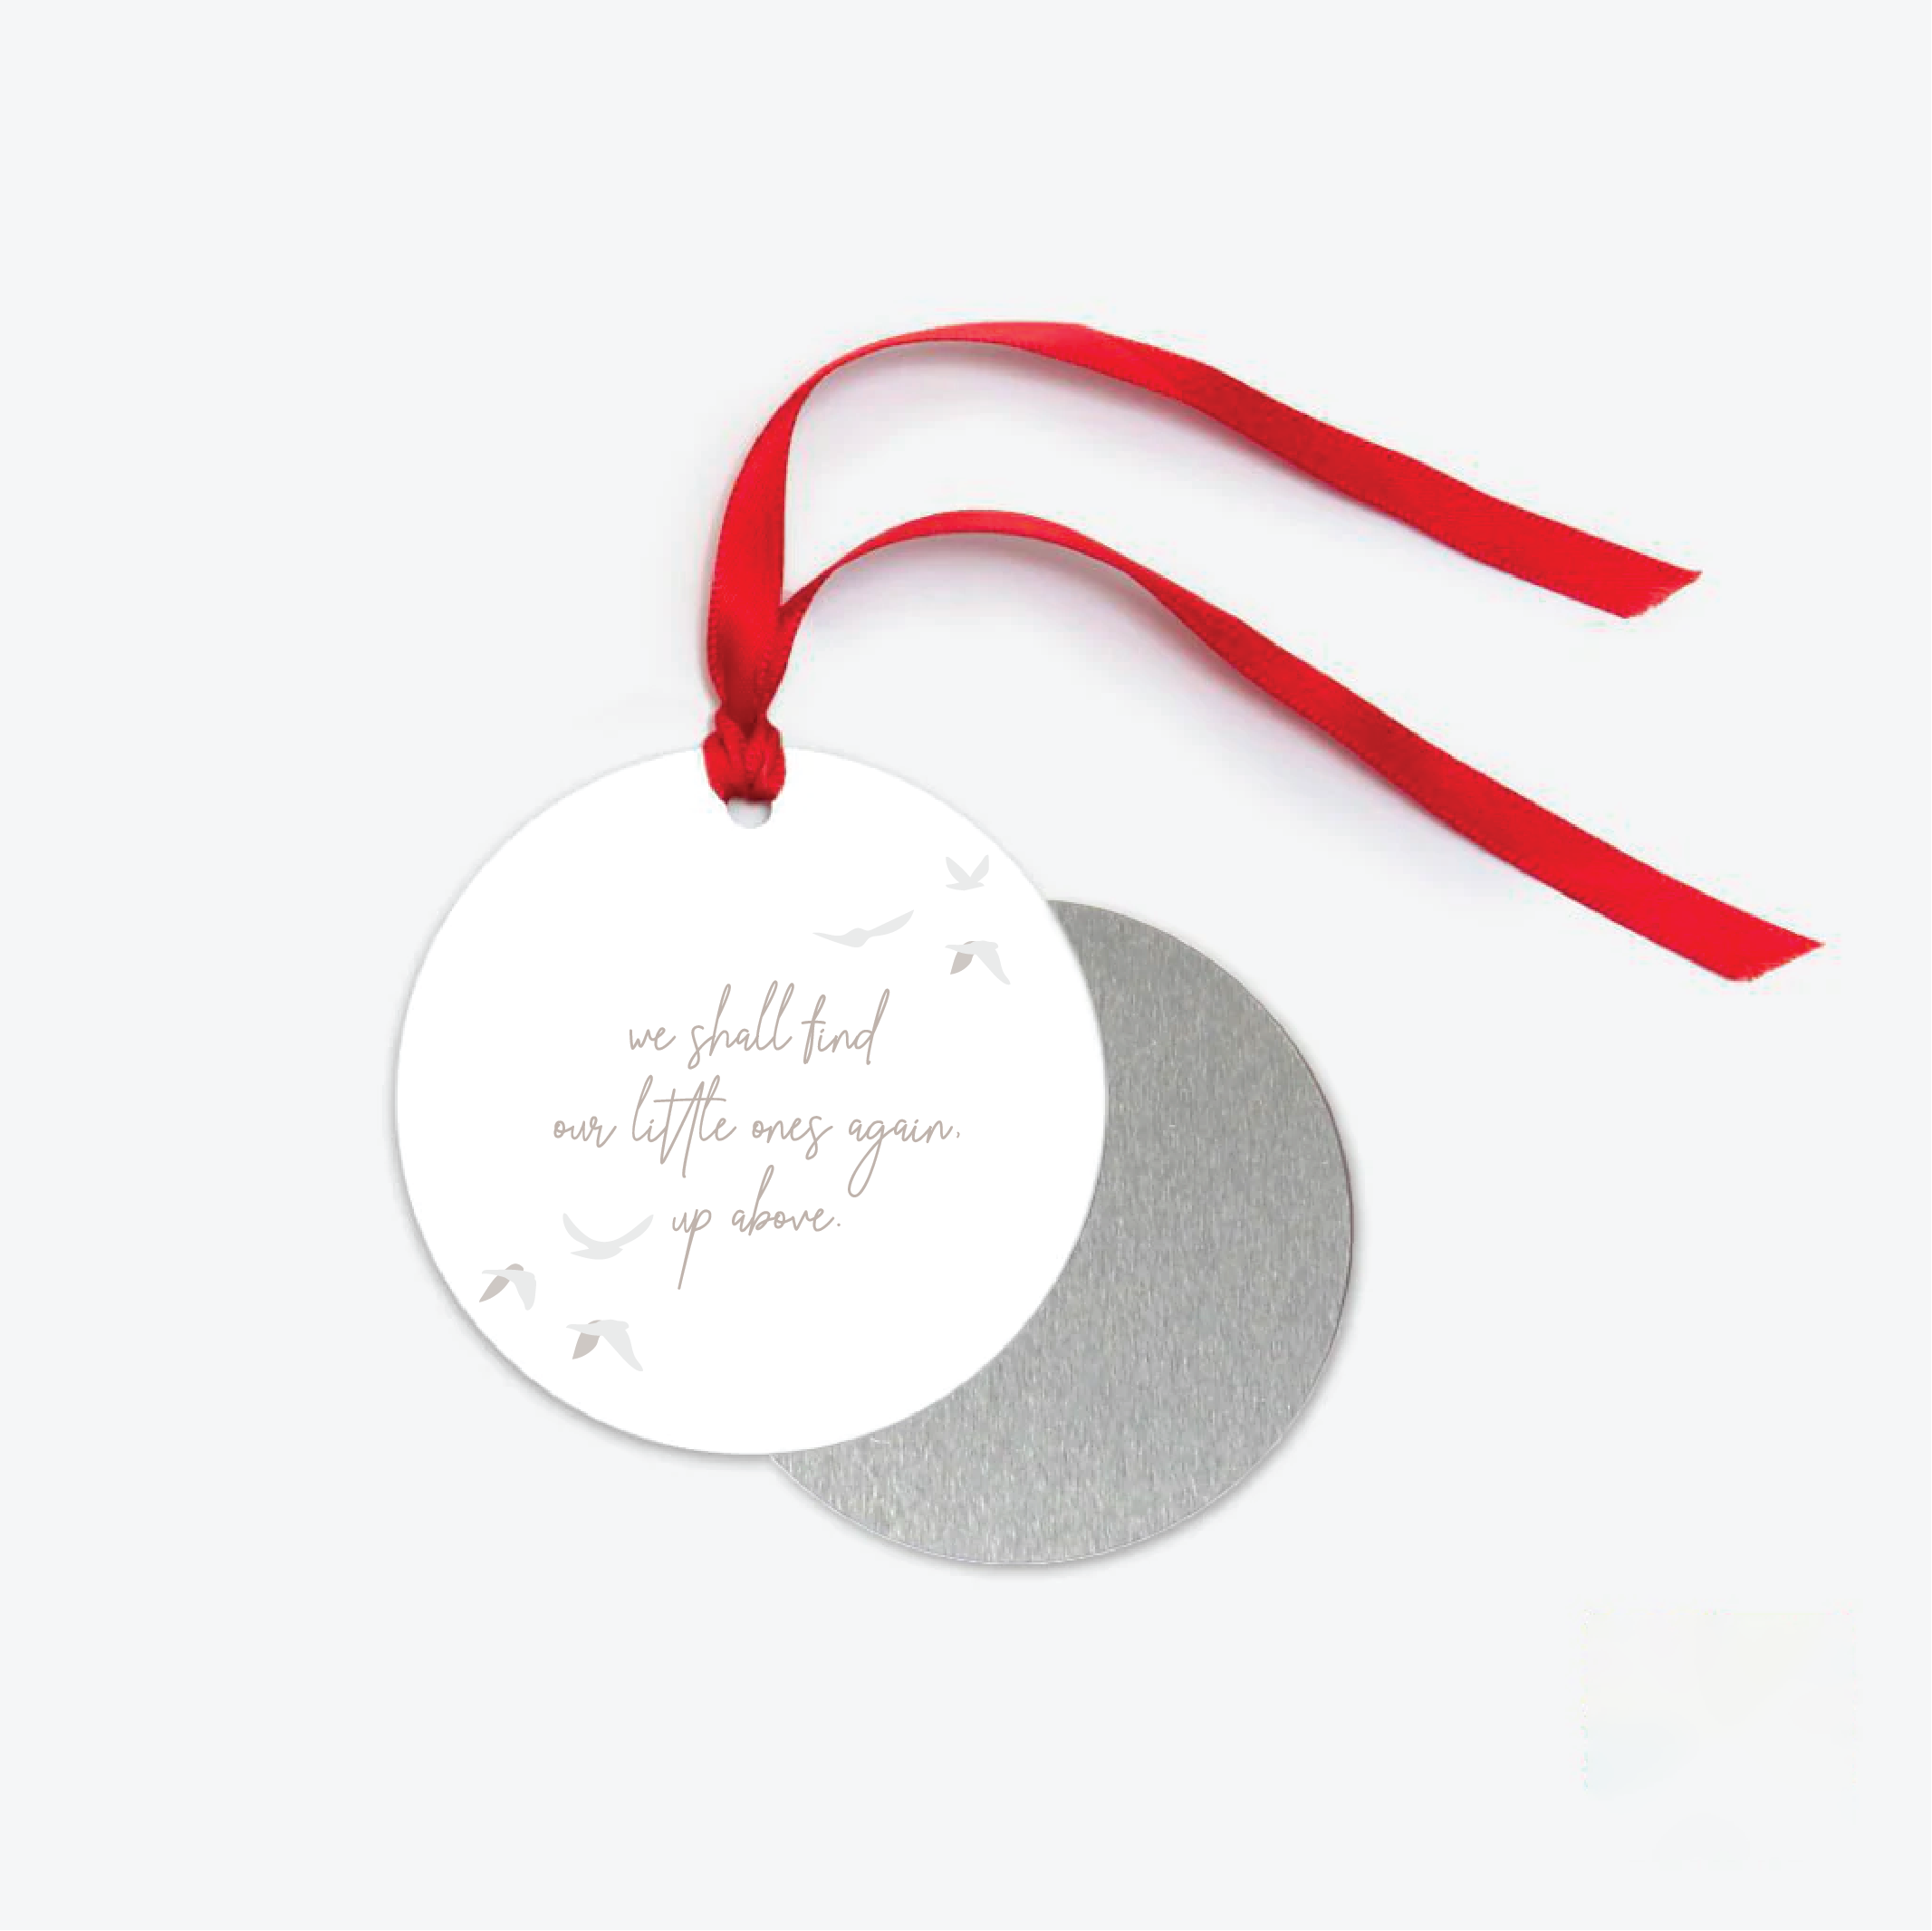 Little ones up above miscarriage ornament-01